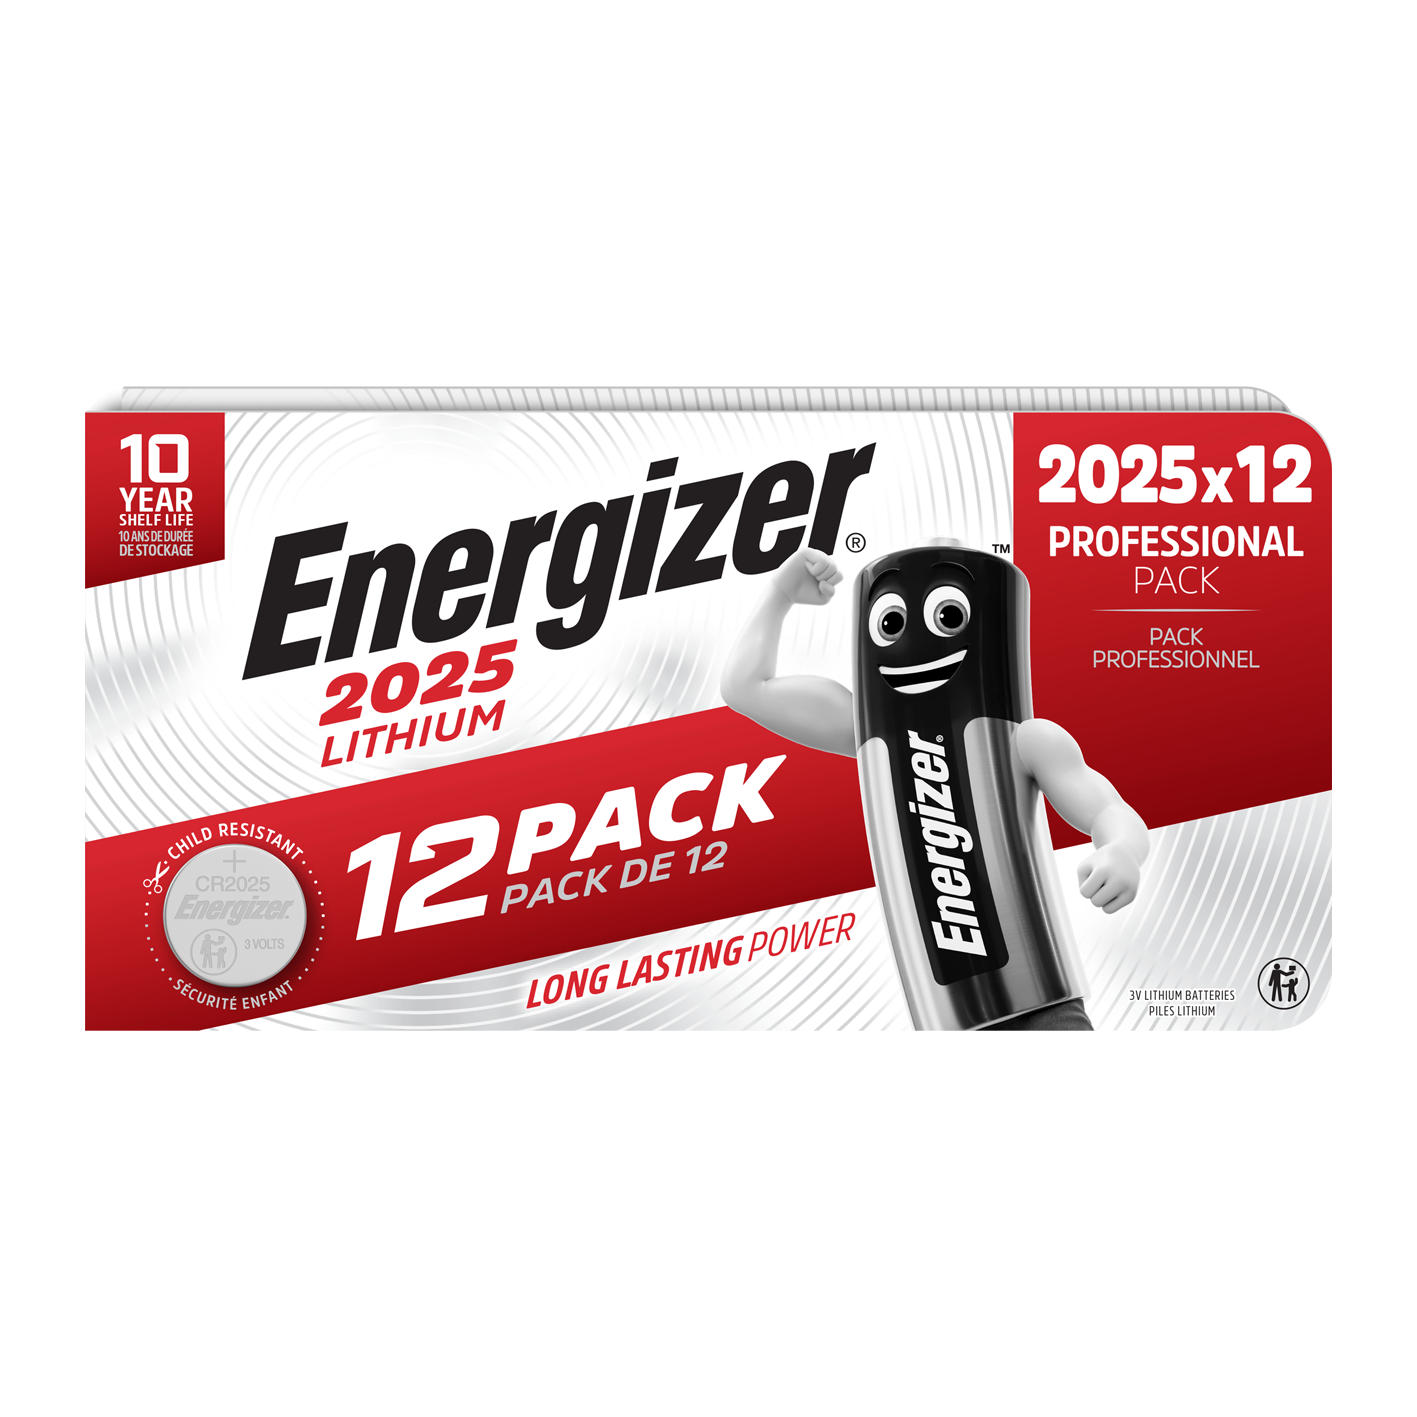 Energizer 2025 Lithium, Pack of 12